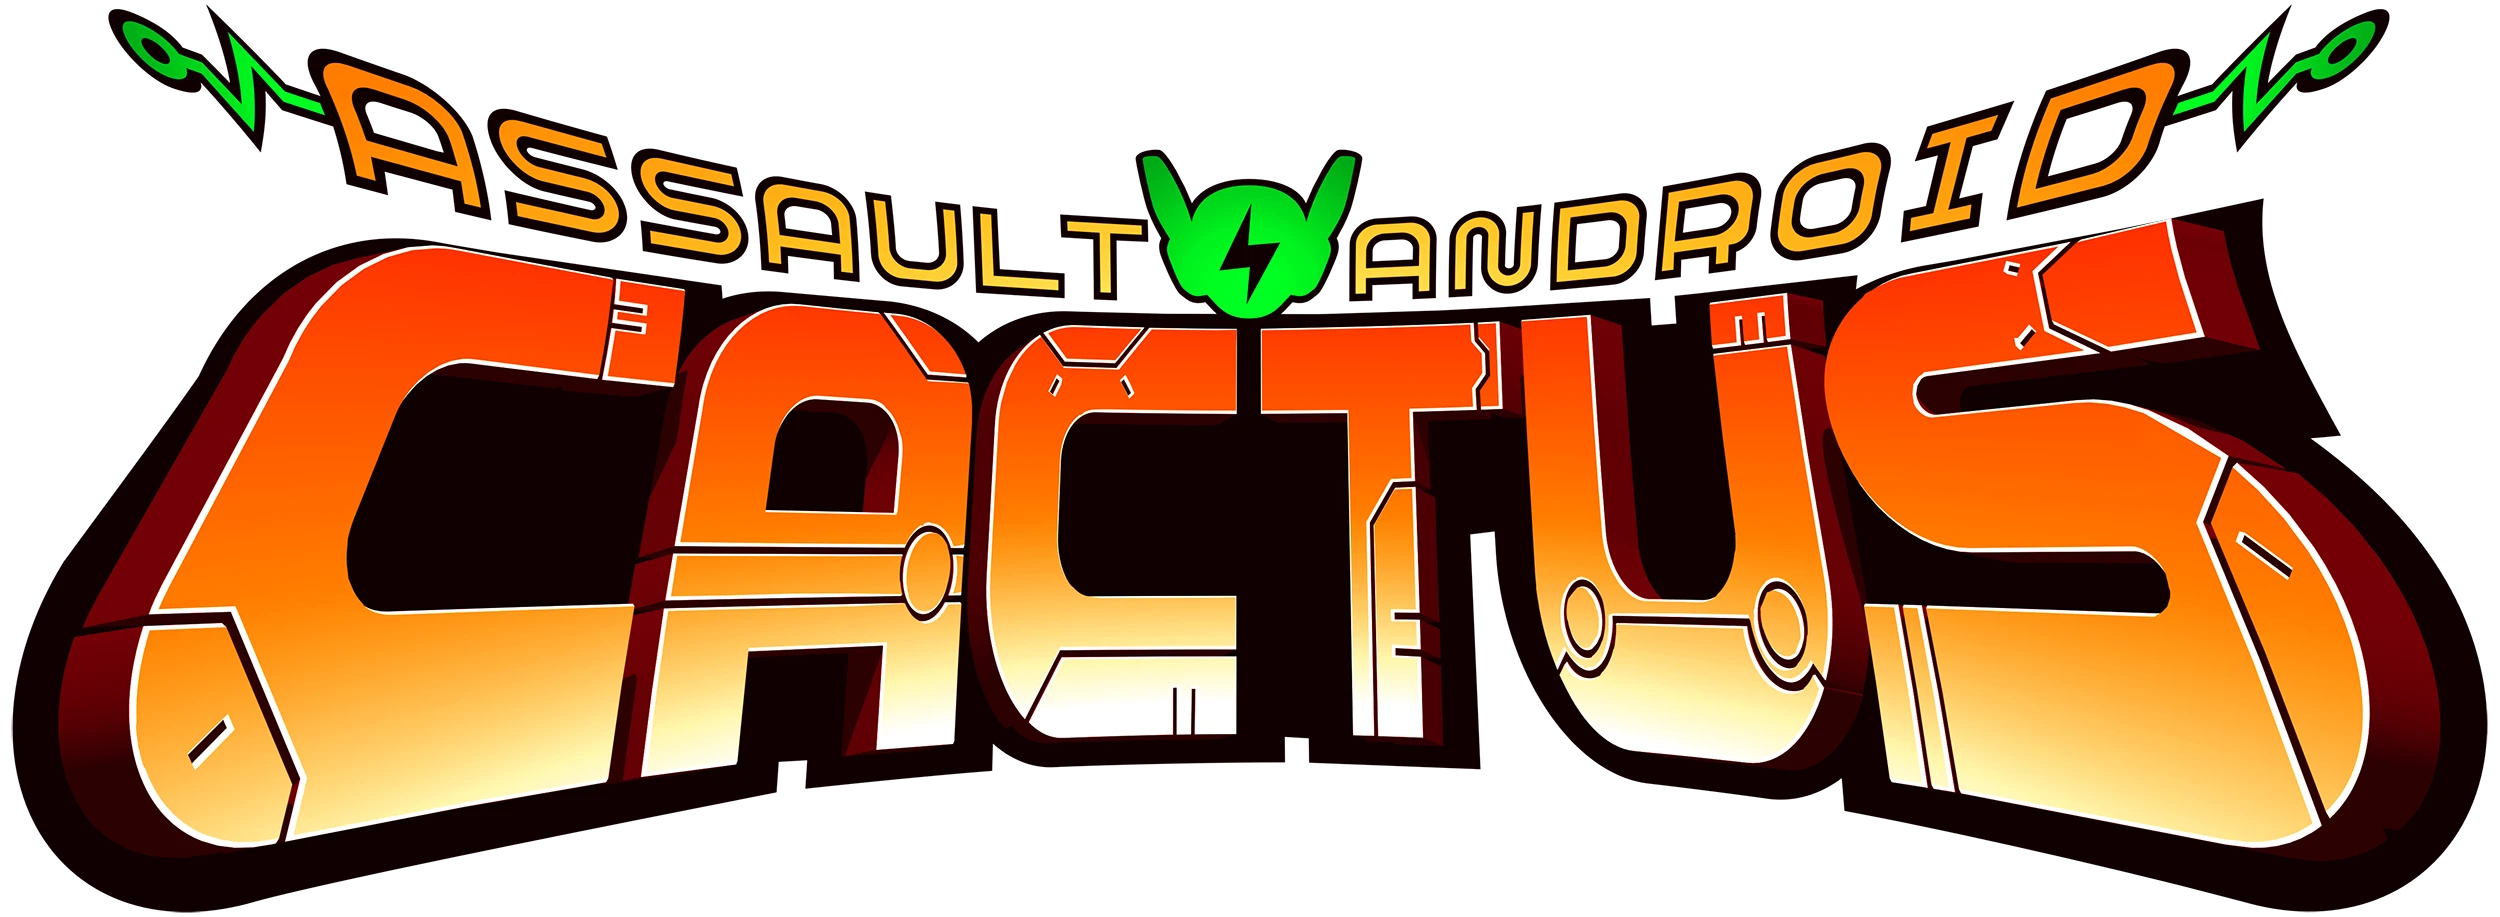 Assault Android Cactuts Logo